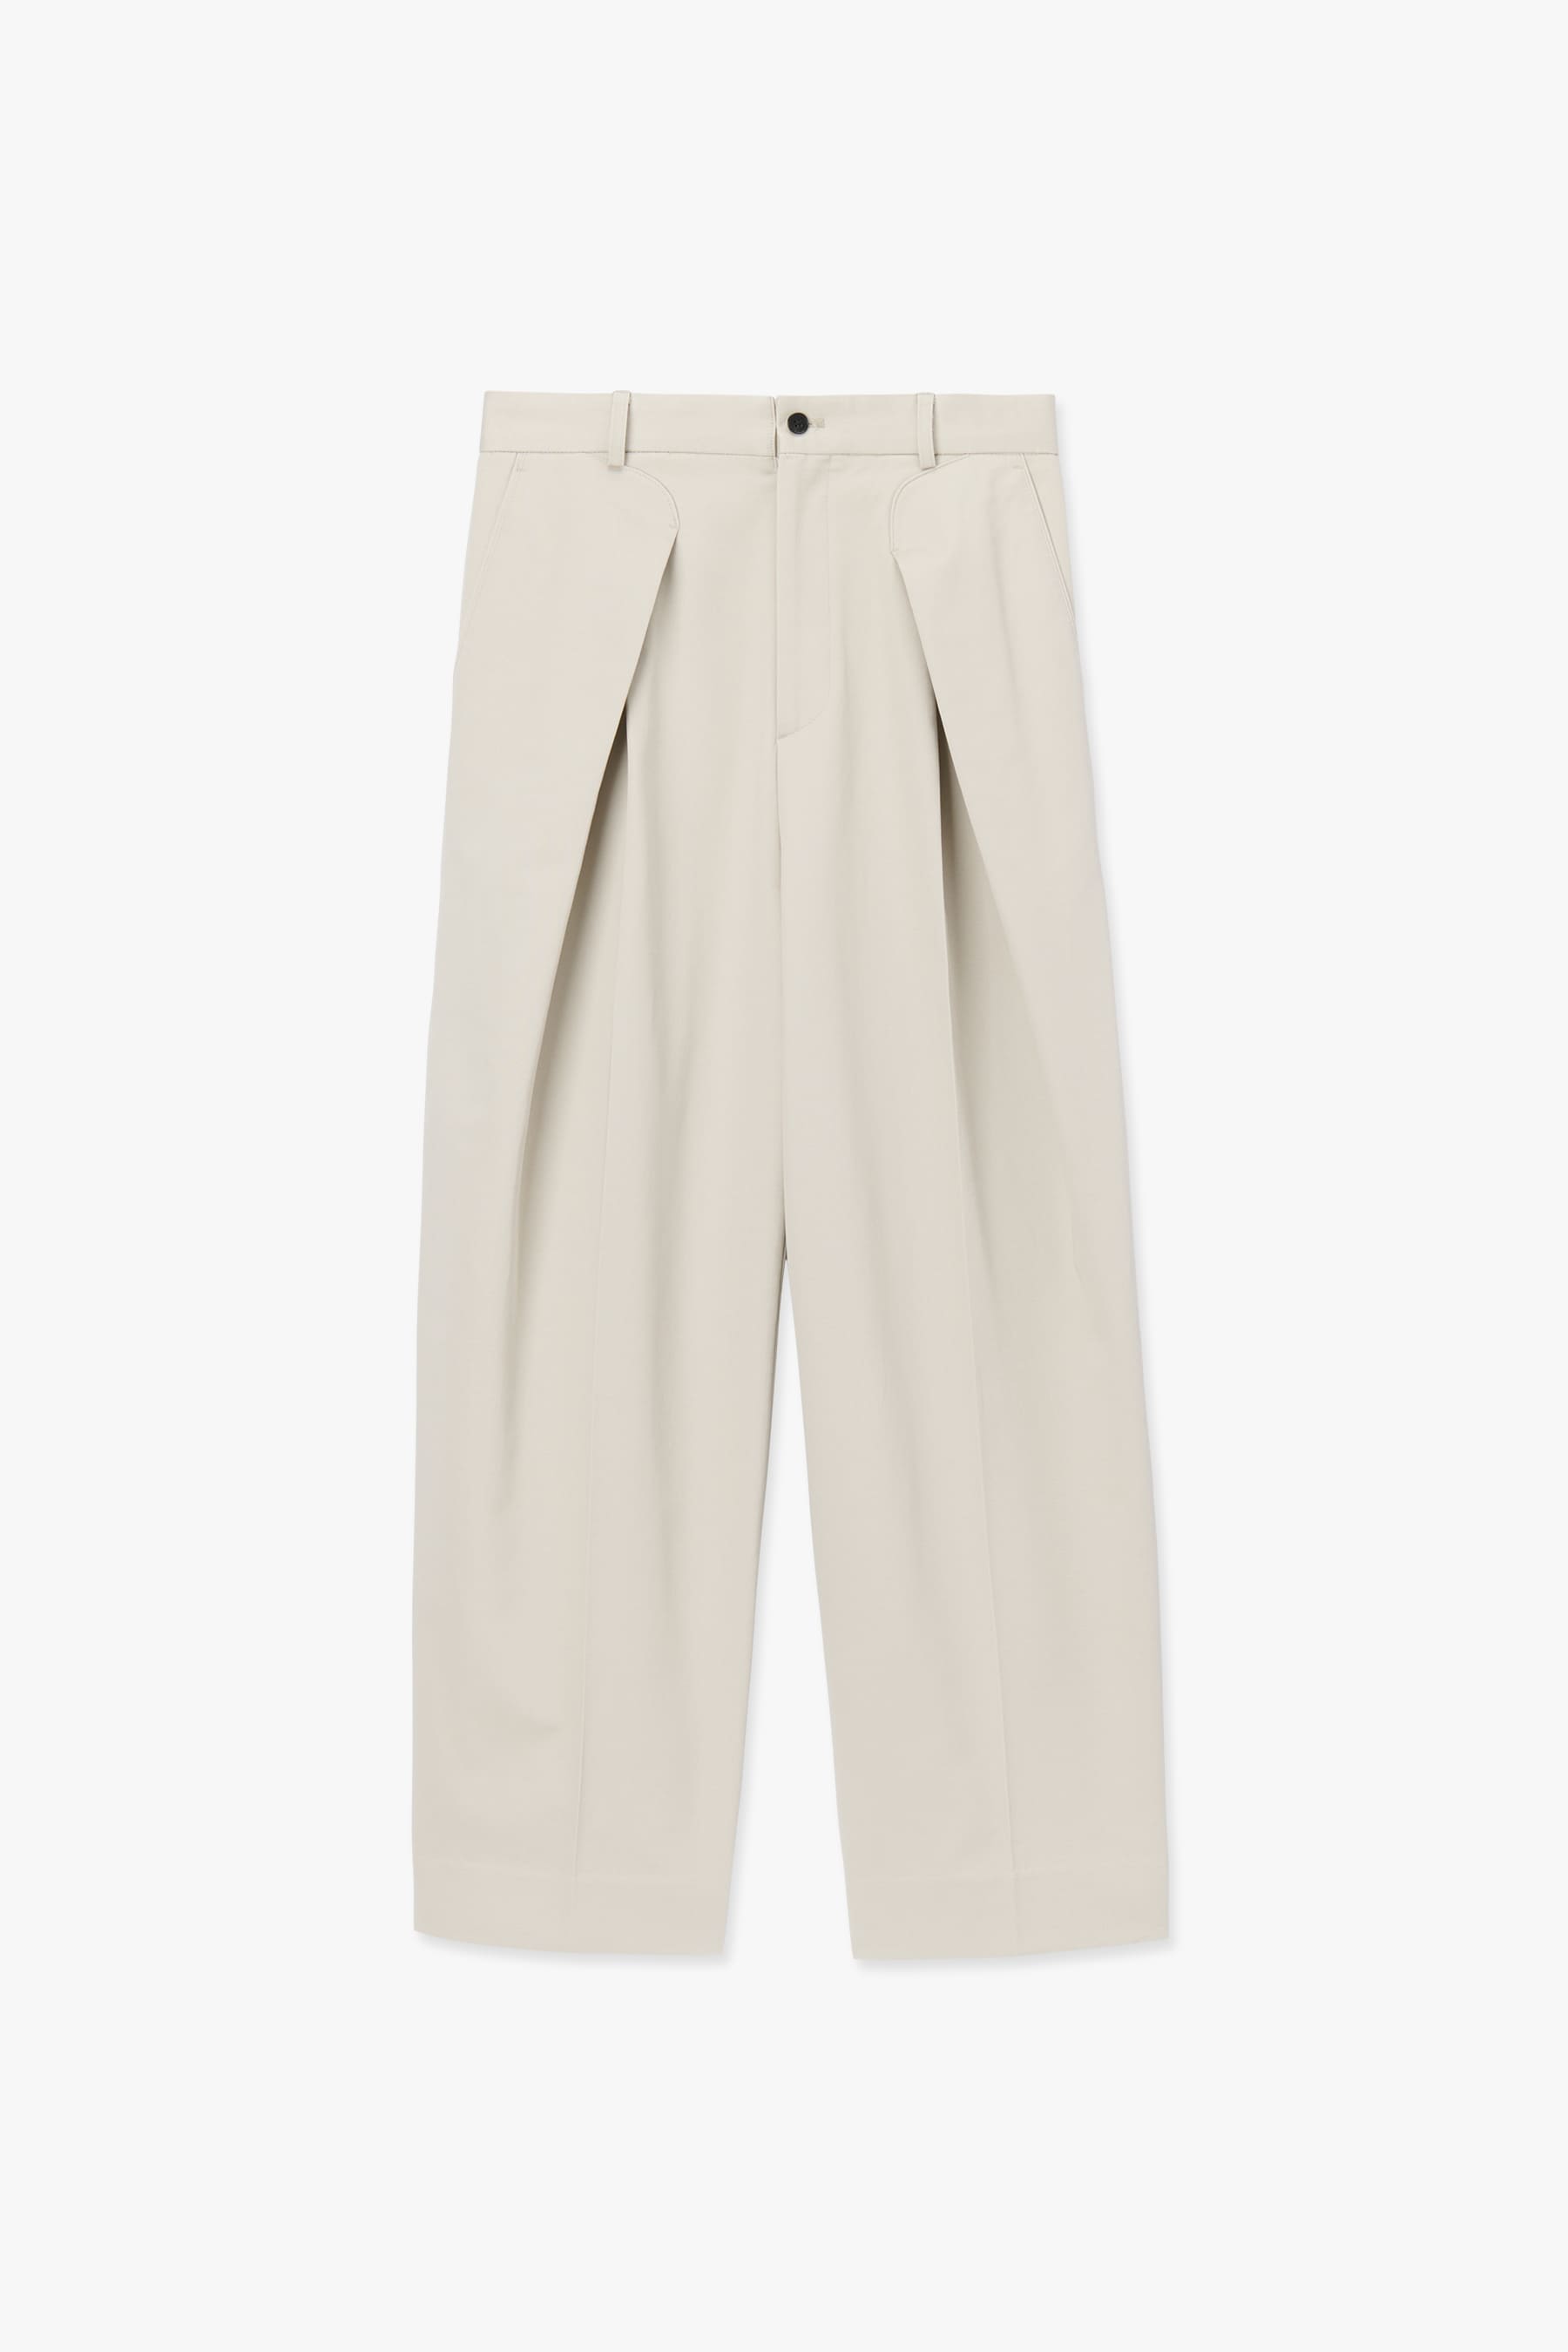 COTTON LIGHT GREY OVERLAP TWO TUCK WIDE PANTS